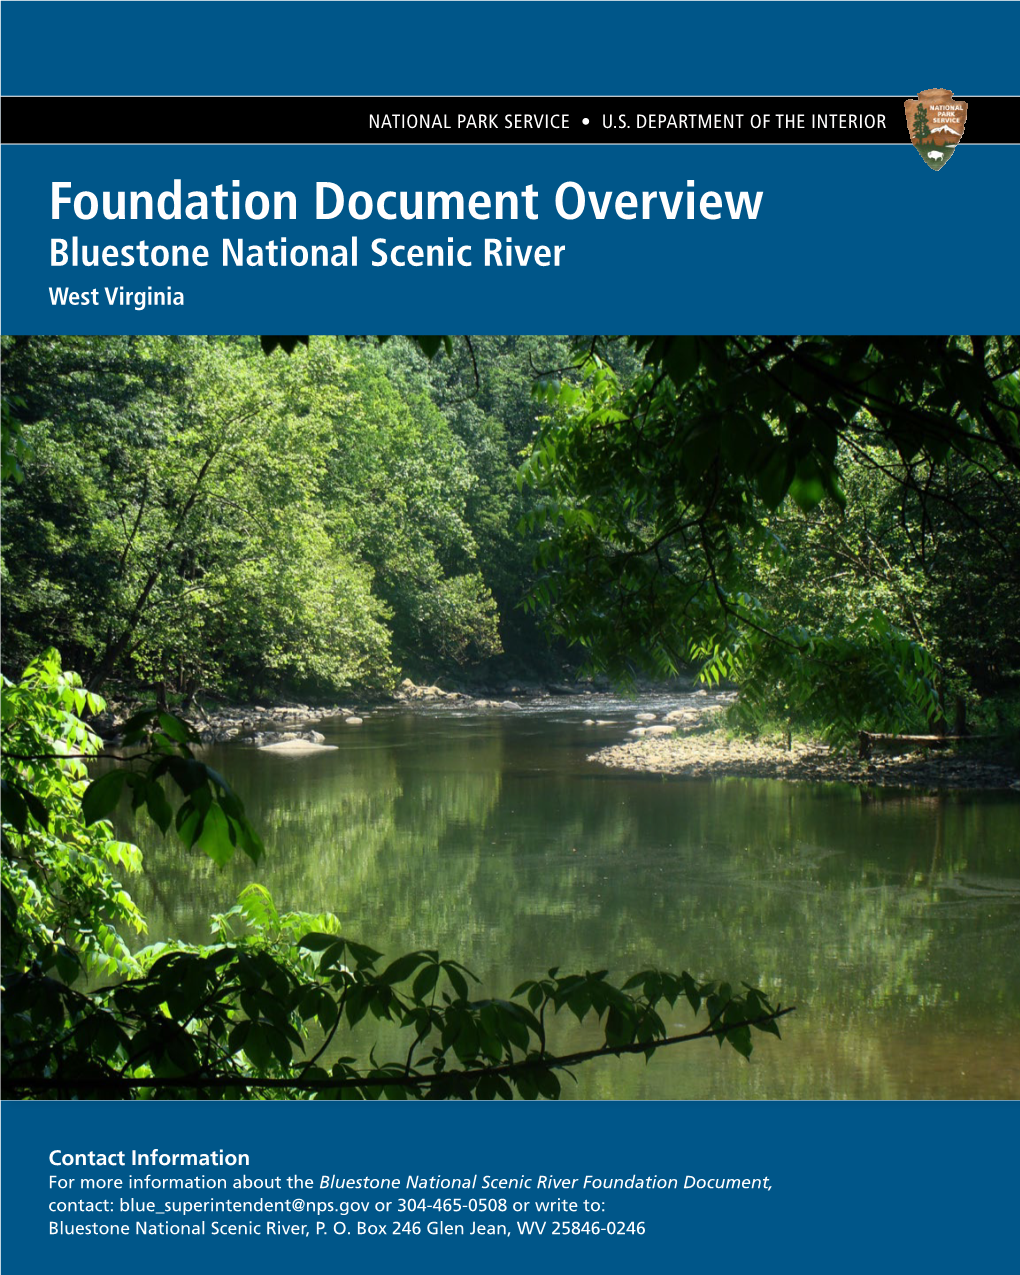 Foundation Document Overview, Bluestone National Scenic River, West Virginia